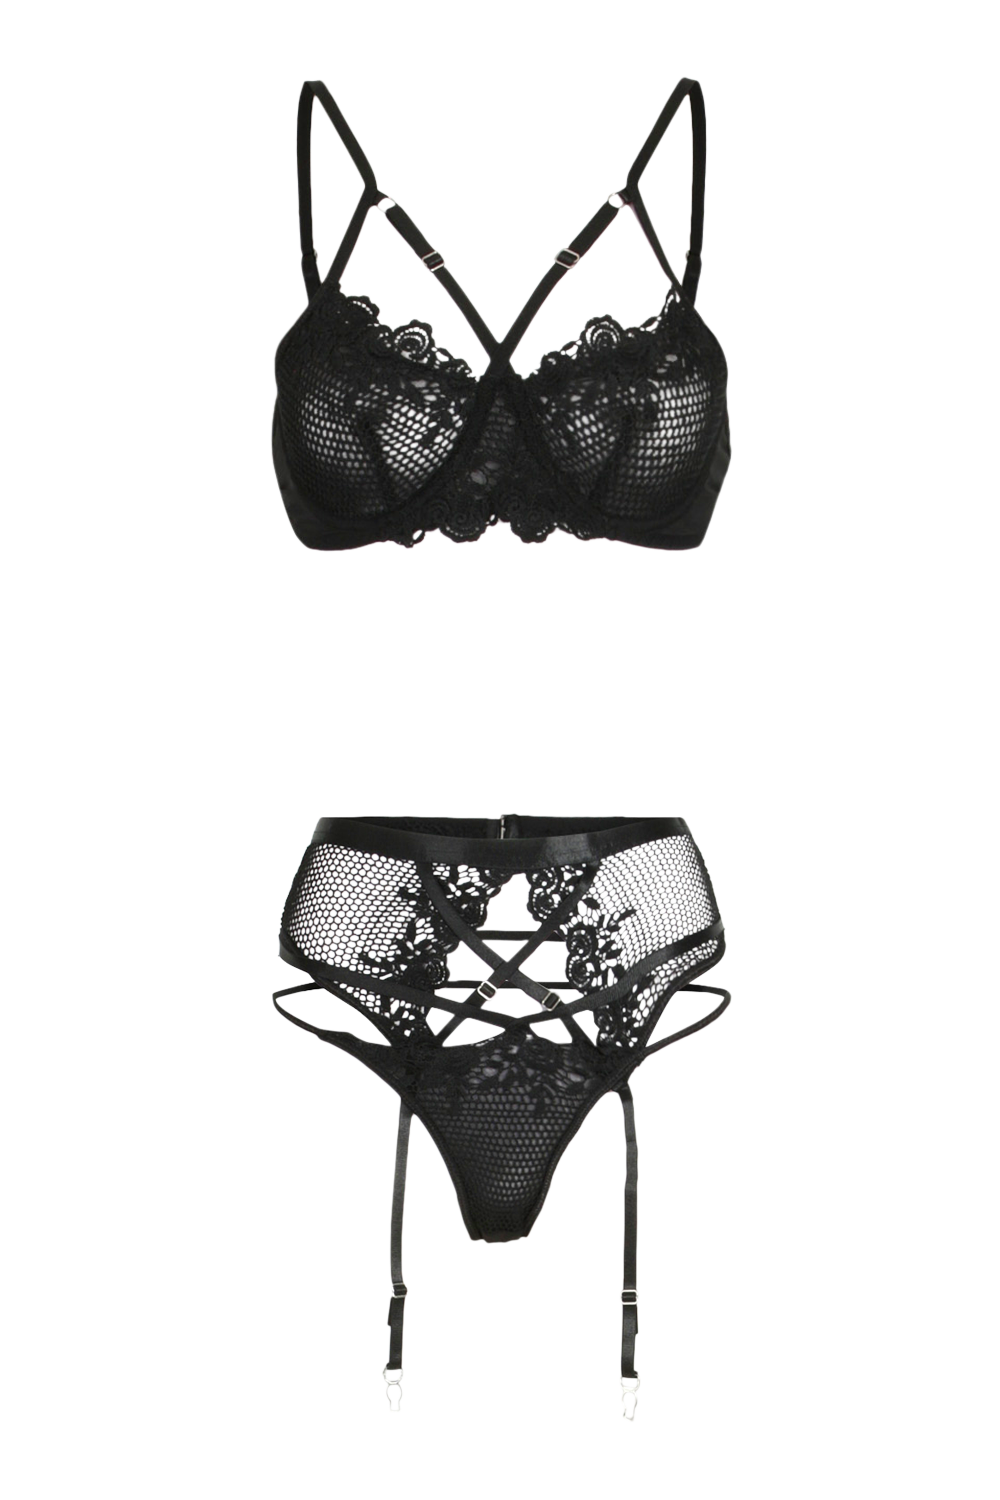 Women's Strapping 3 Piece Lingerie Set